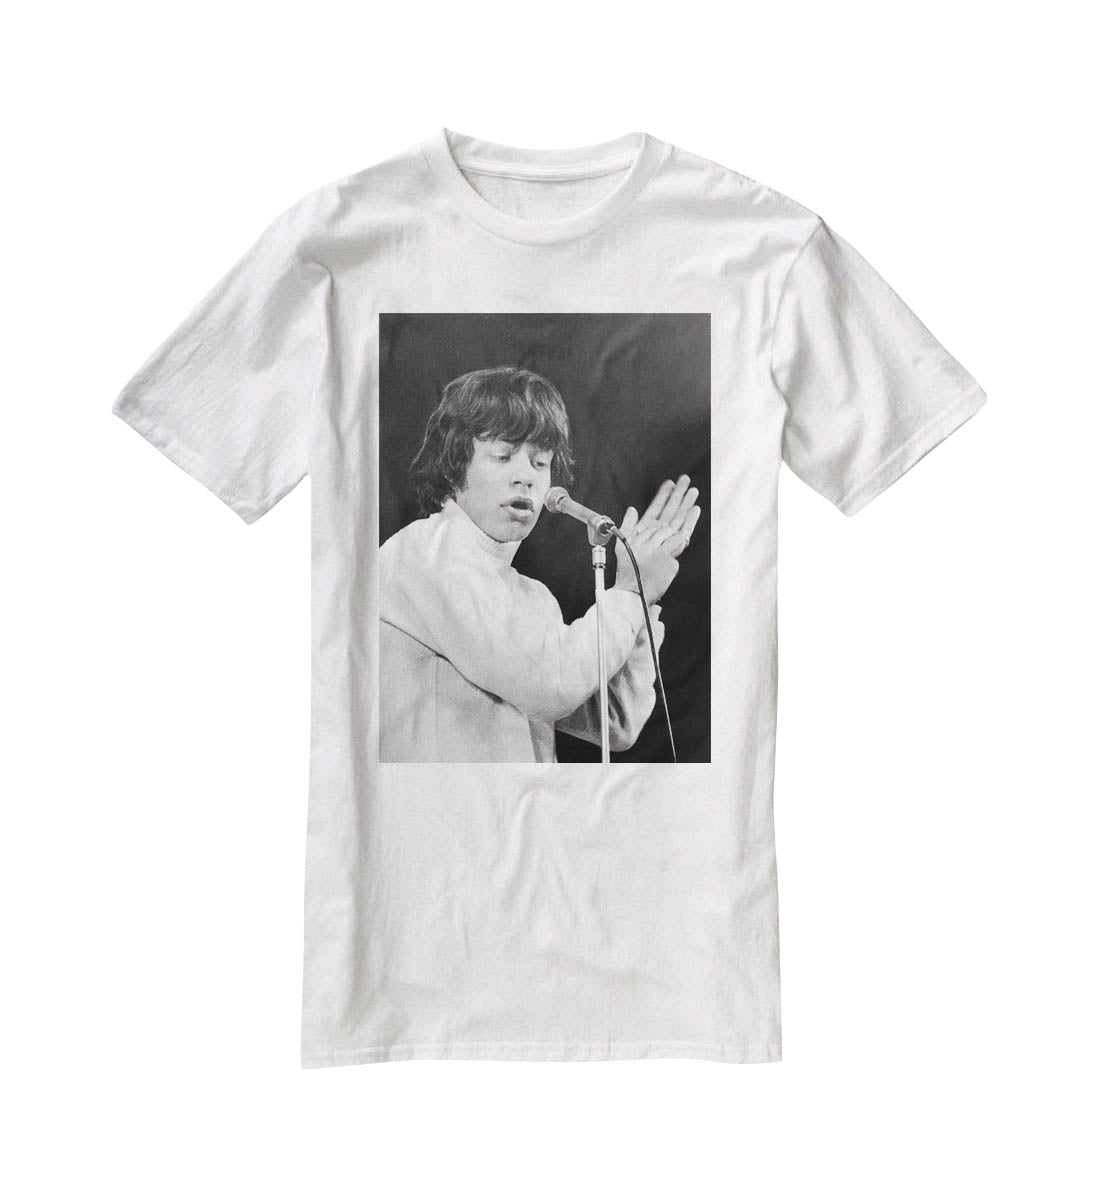 Mick Jagger on stage in 1965 T-Shirt - Canvas Art Rocks - 5